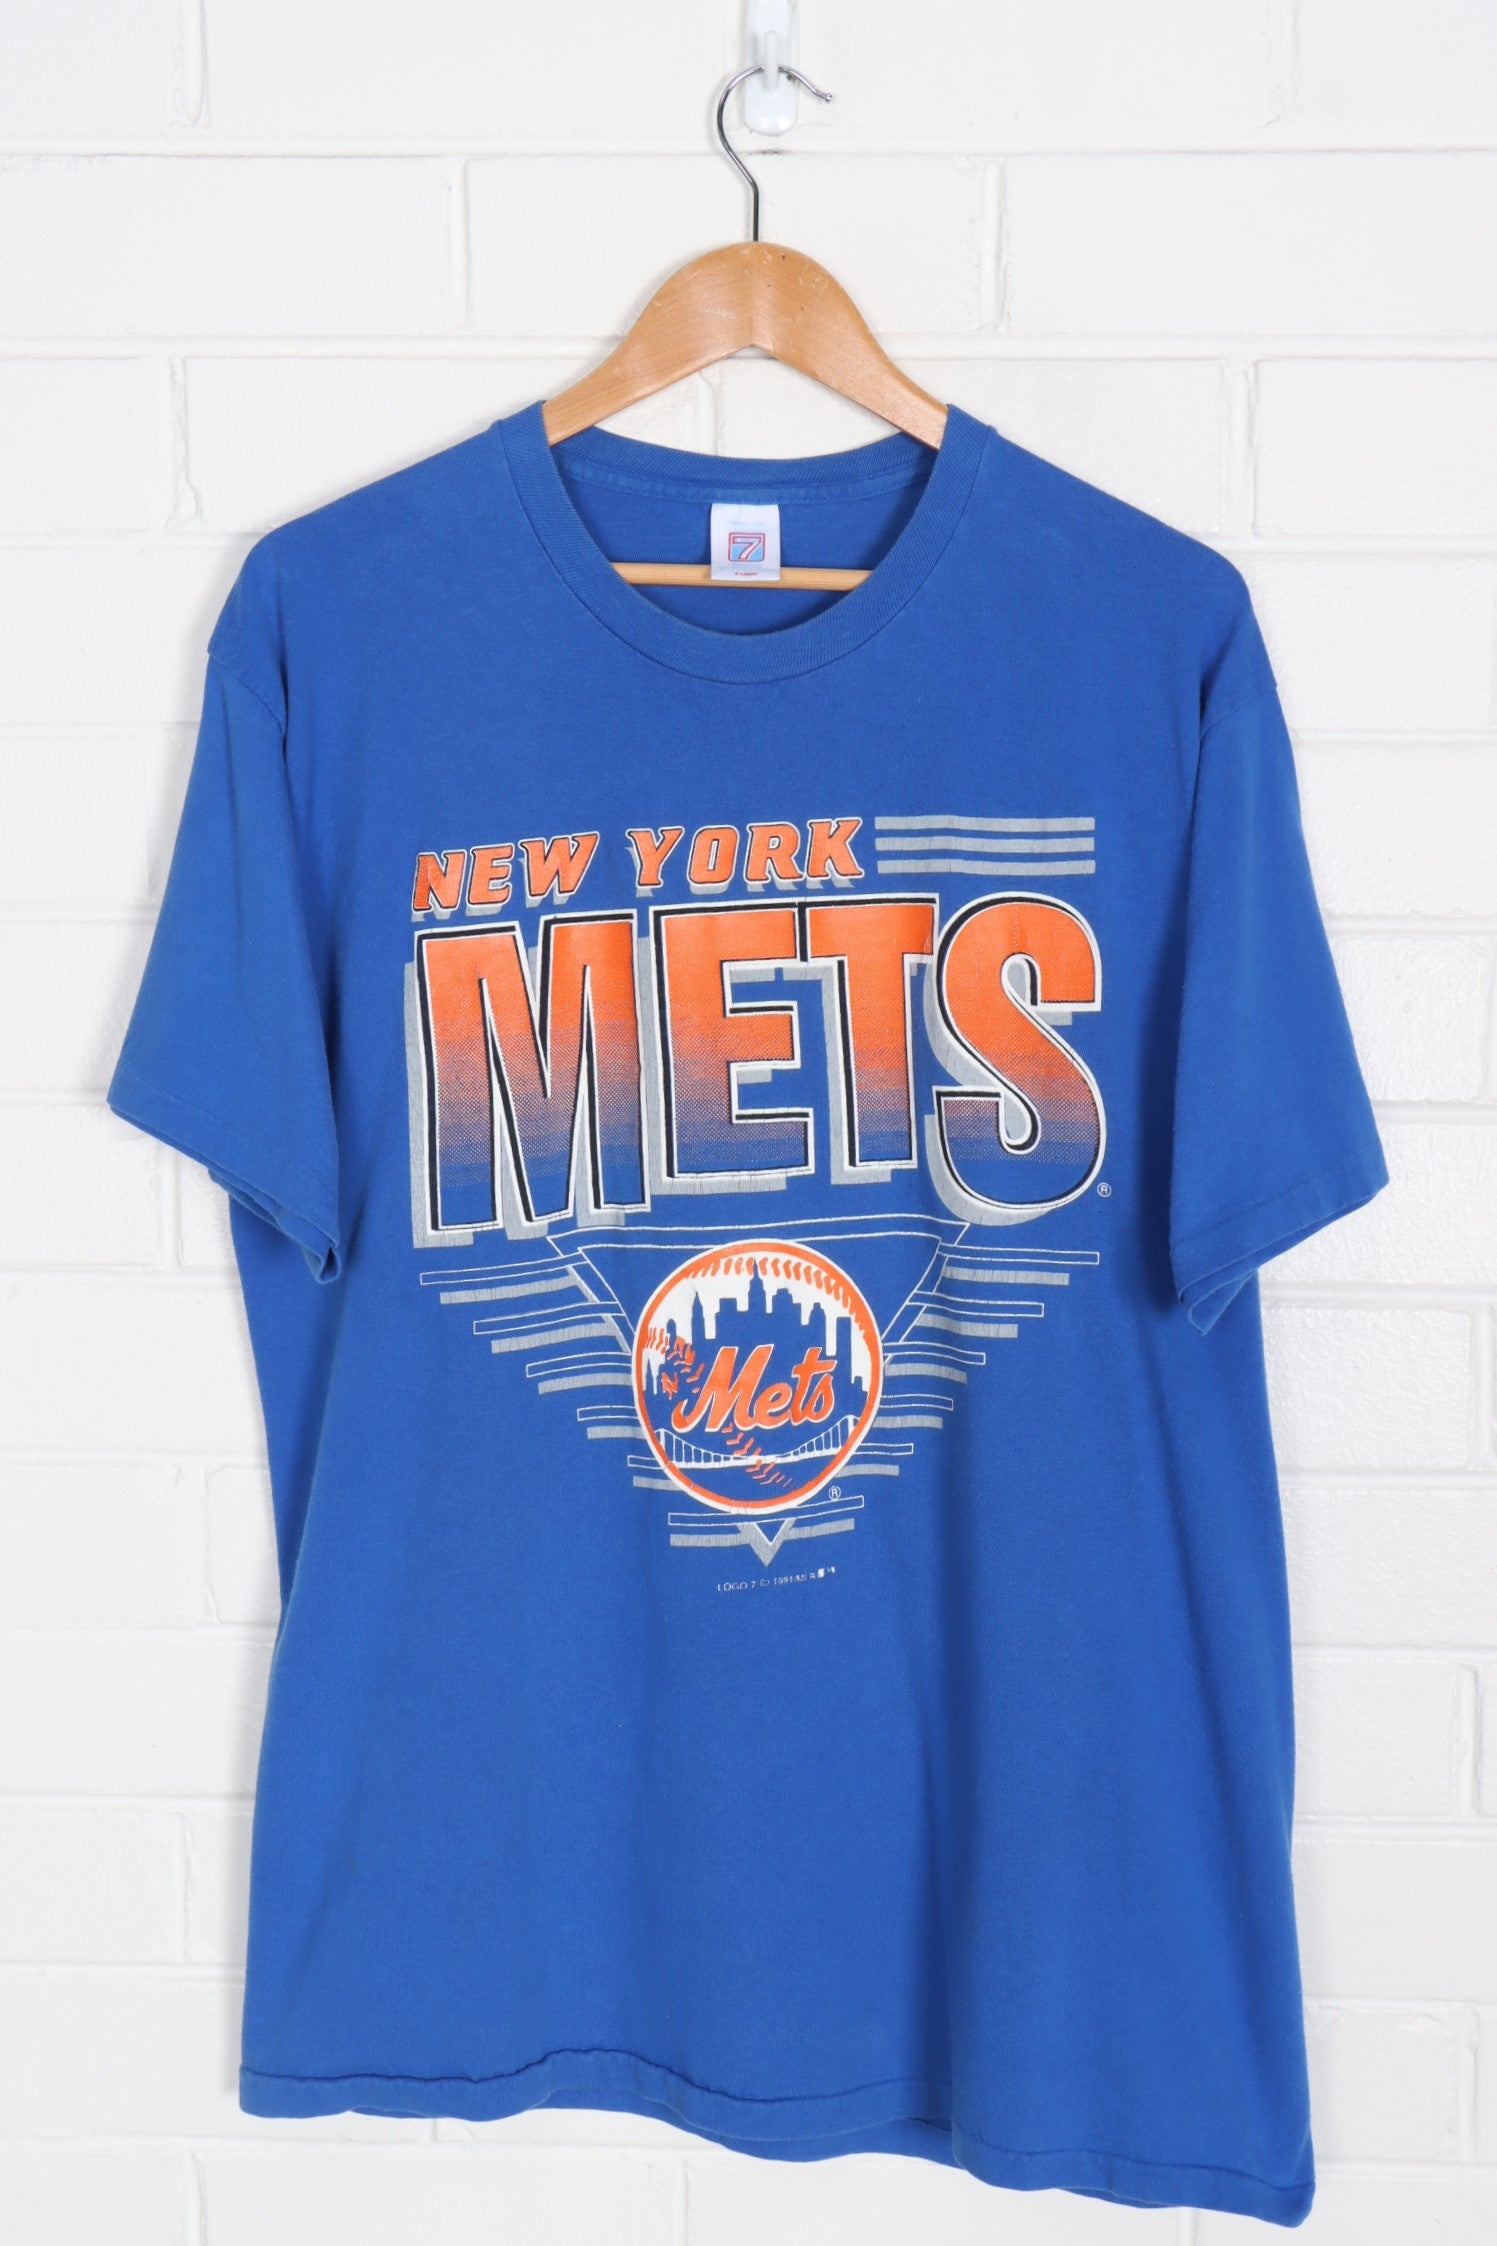 Sports / College Vintage Champion MLB New York Mets Tee Shirt 1988 Size Large Made in USA